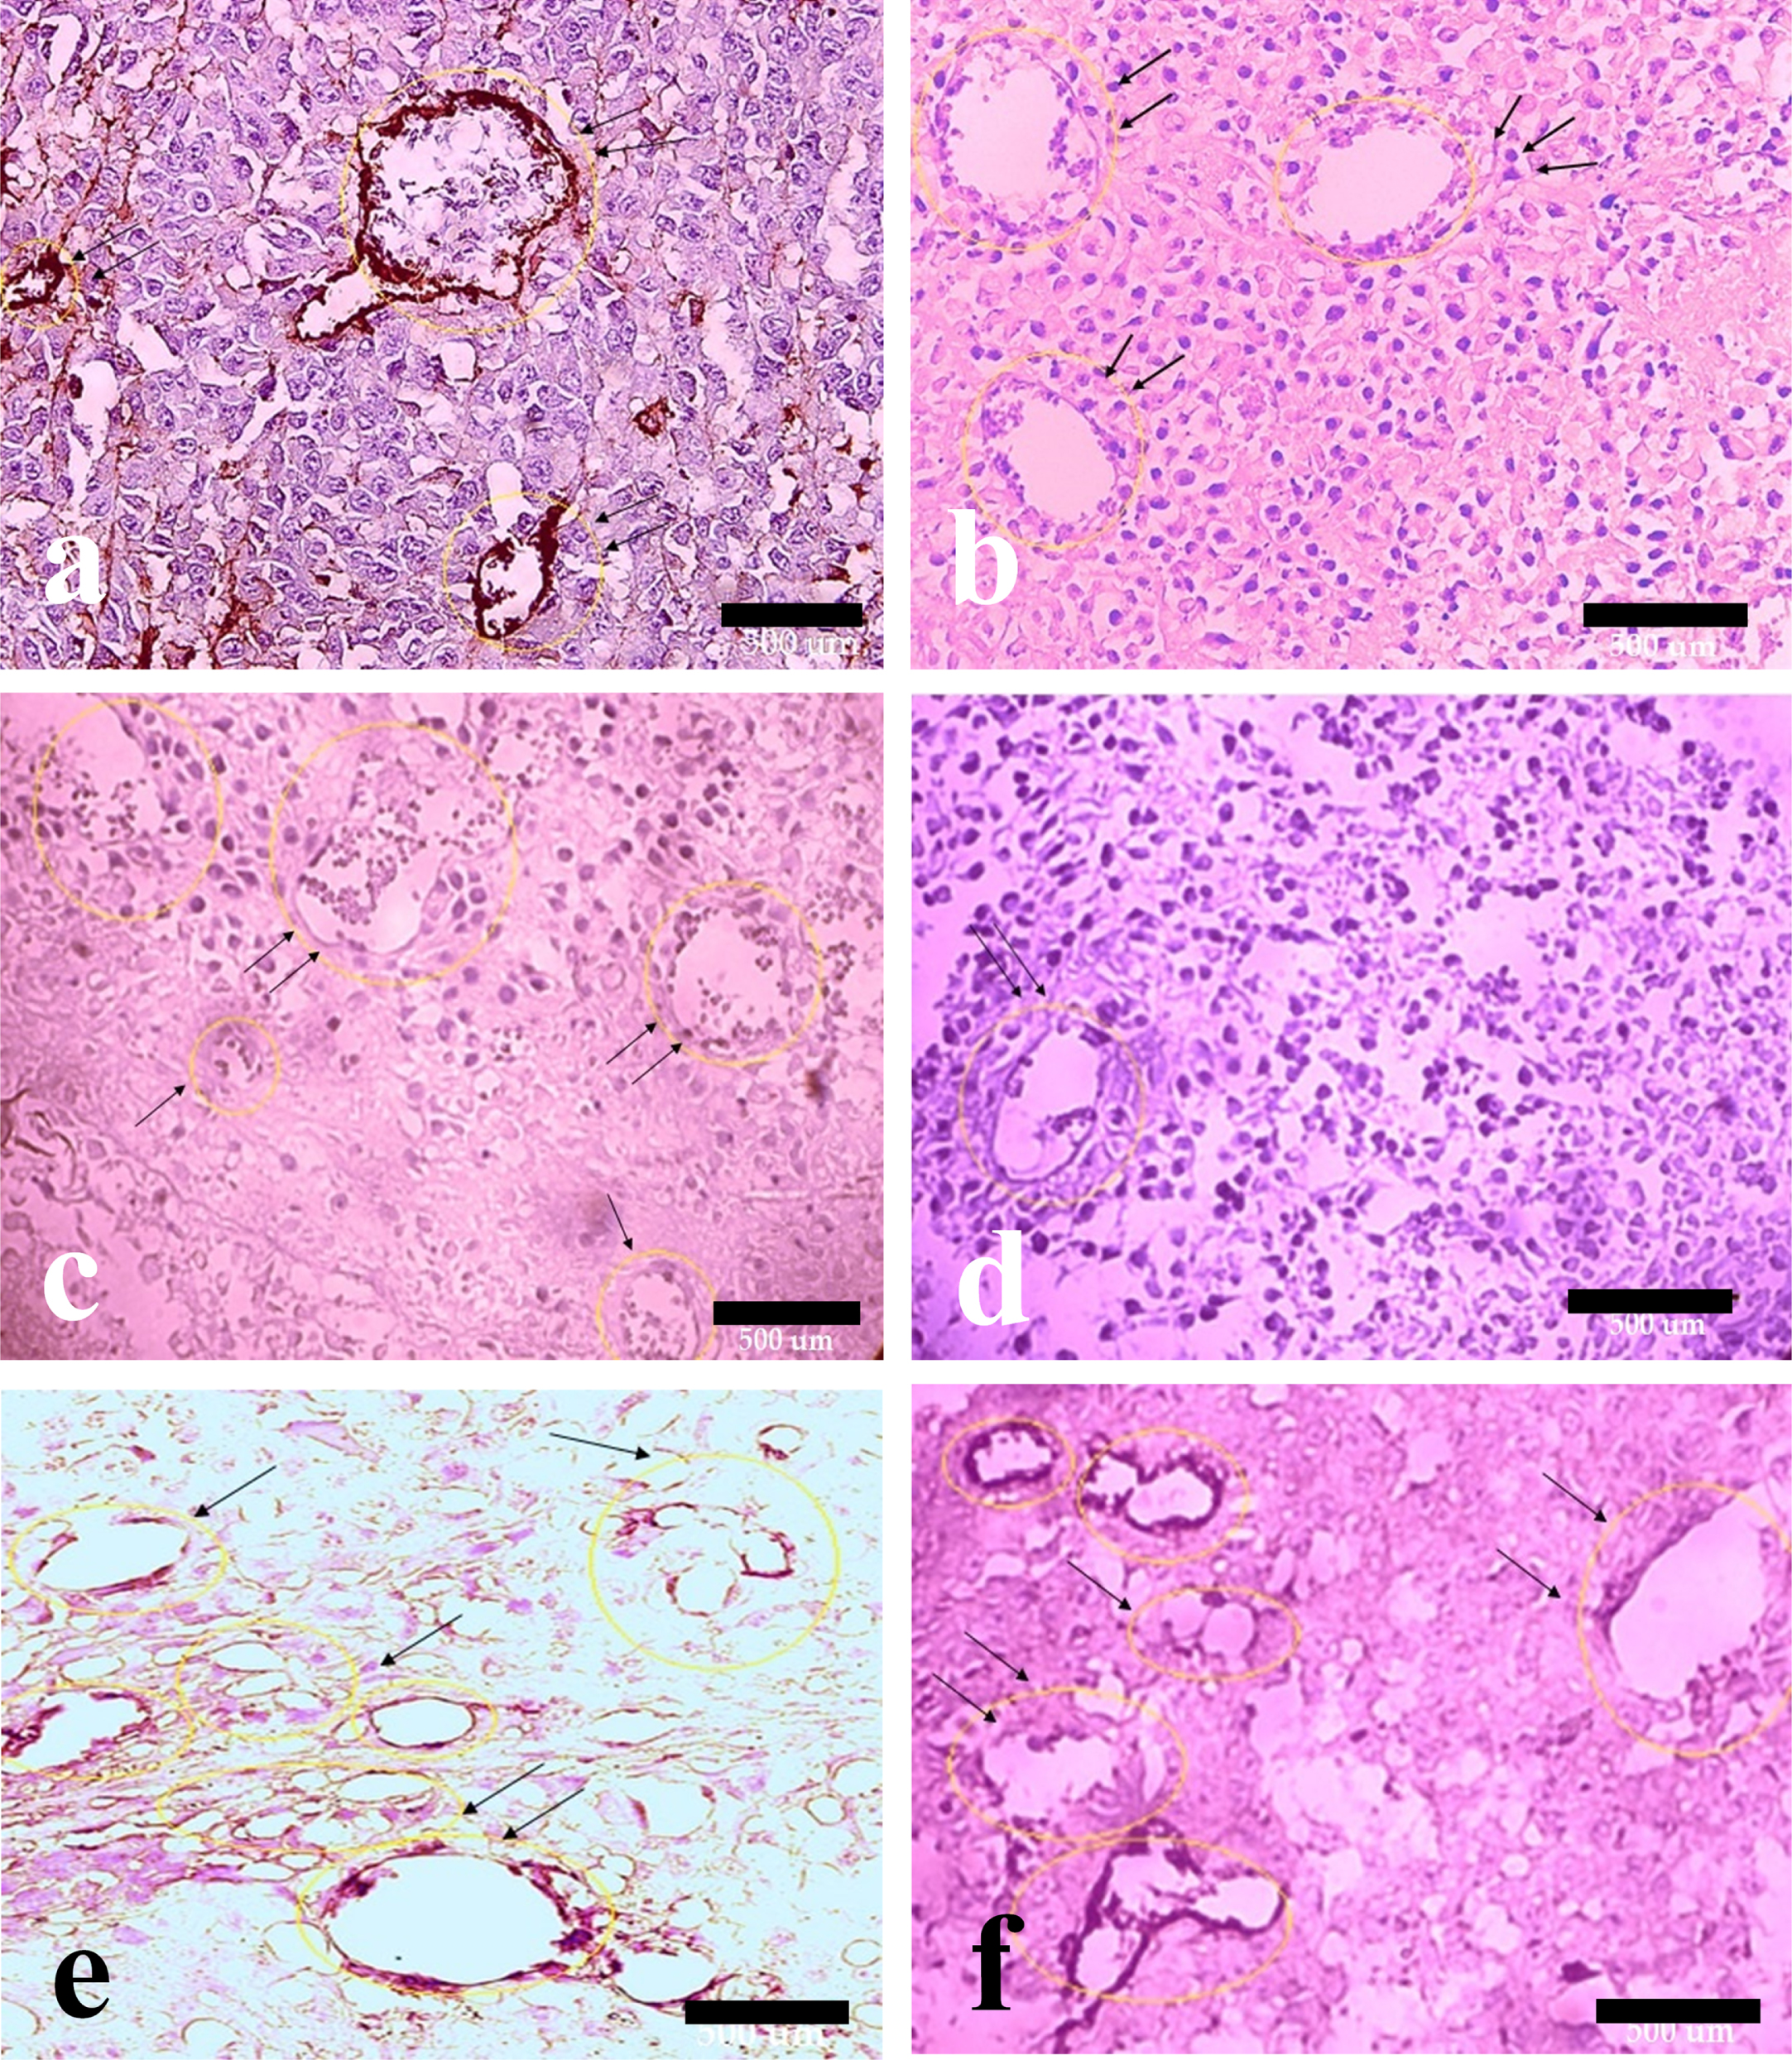 Hematoxylin and eosin with anti-PDGFR immunohistochemical staining of melanoma tumor tissue. Effect of HIF-1α and ALK5 signaling pathways on pericyte recruitment in a mouse melanoma model between the control and treatment groups (40x magnification). Picture A represents PDGFR staining in the control group. Pictures B, C, D, E, and F represent PDGFR staining in HIF-ihb, HIF-ihb/Alk5-ihb, Alk5-ihb, HIF-act, and HIF-act/ Alk5-ihb groups, respectively. Alk5-ihb: ALK5 inhibitor, HIF-ihb: HIF-1α inhibitor, HIF-act: HIF-1α activator. Scale bar is 500 µm.